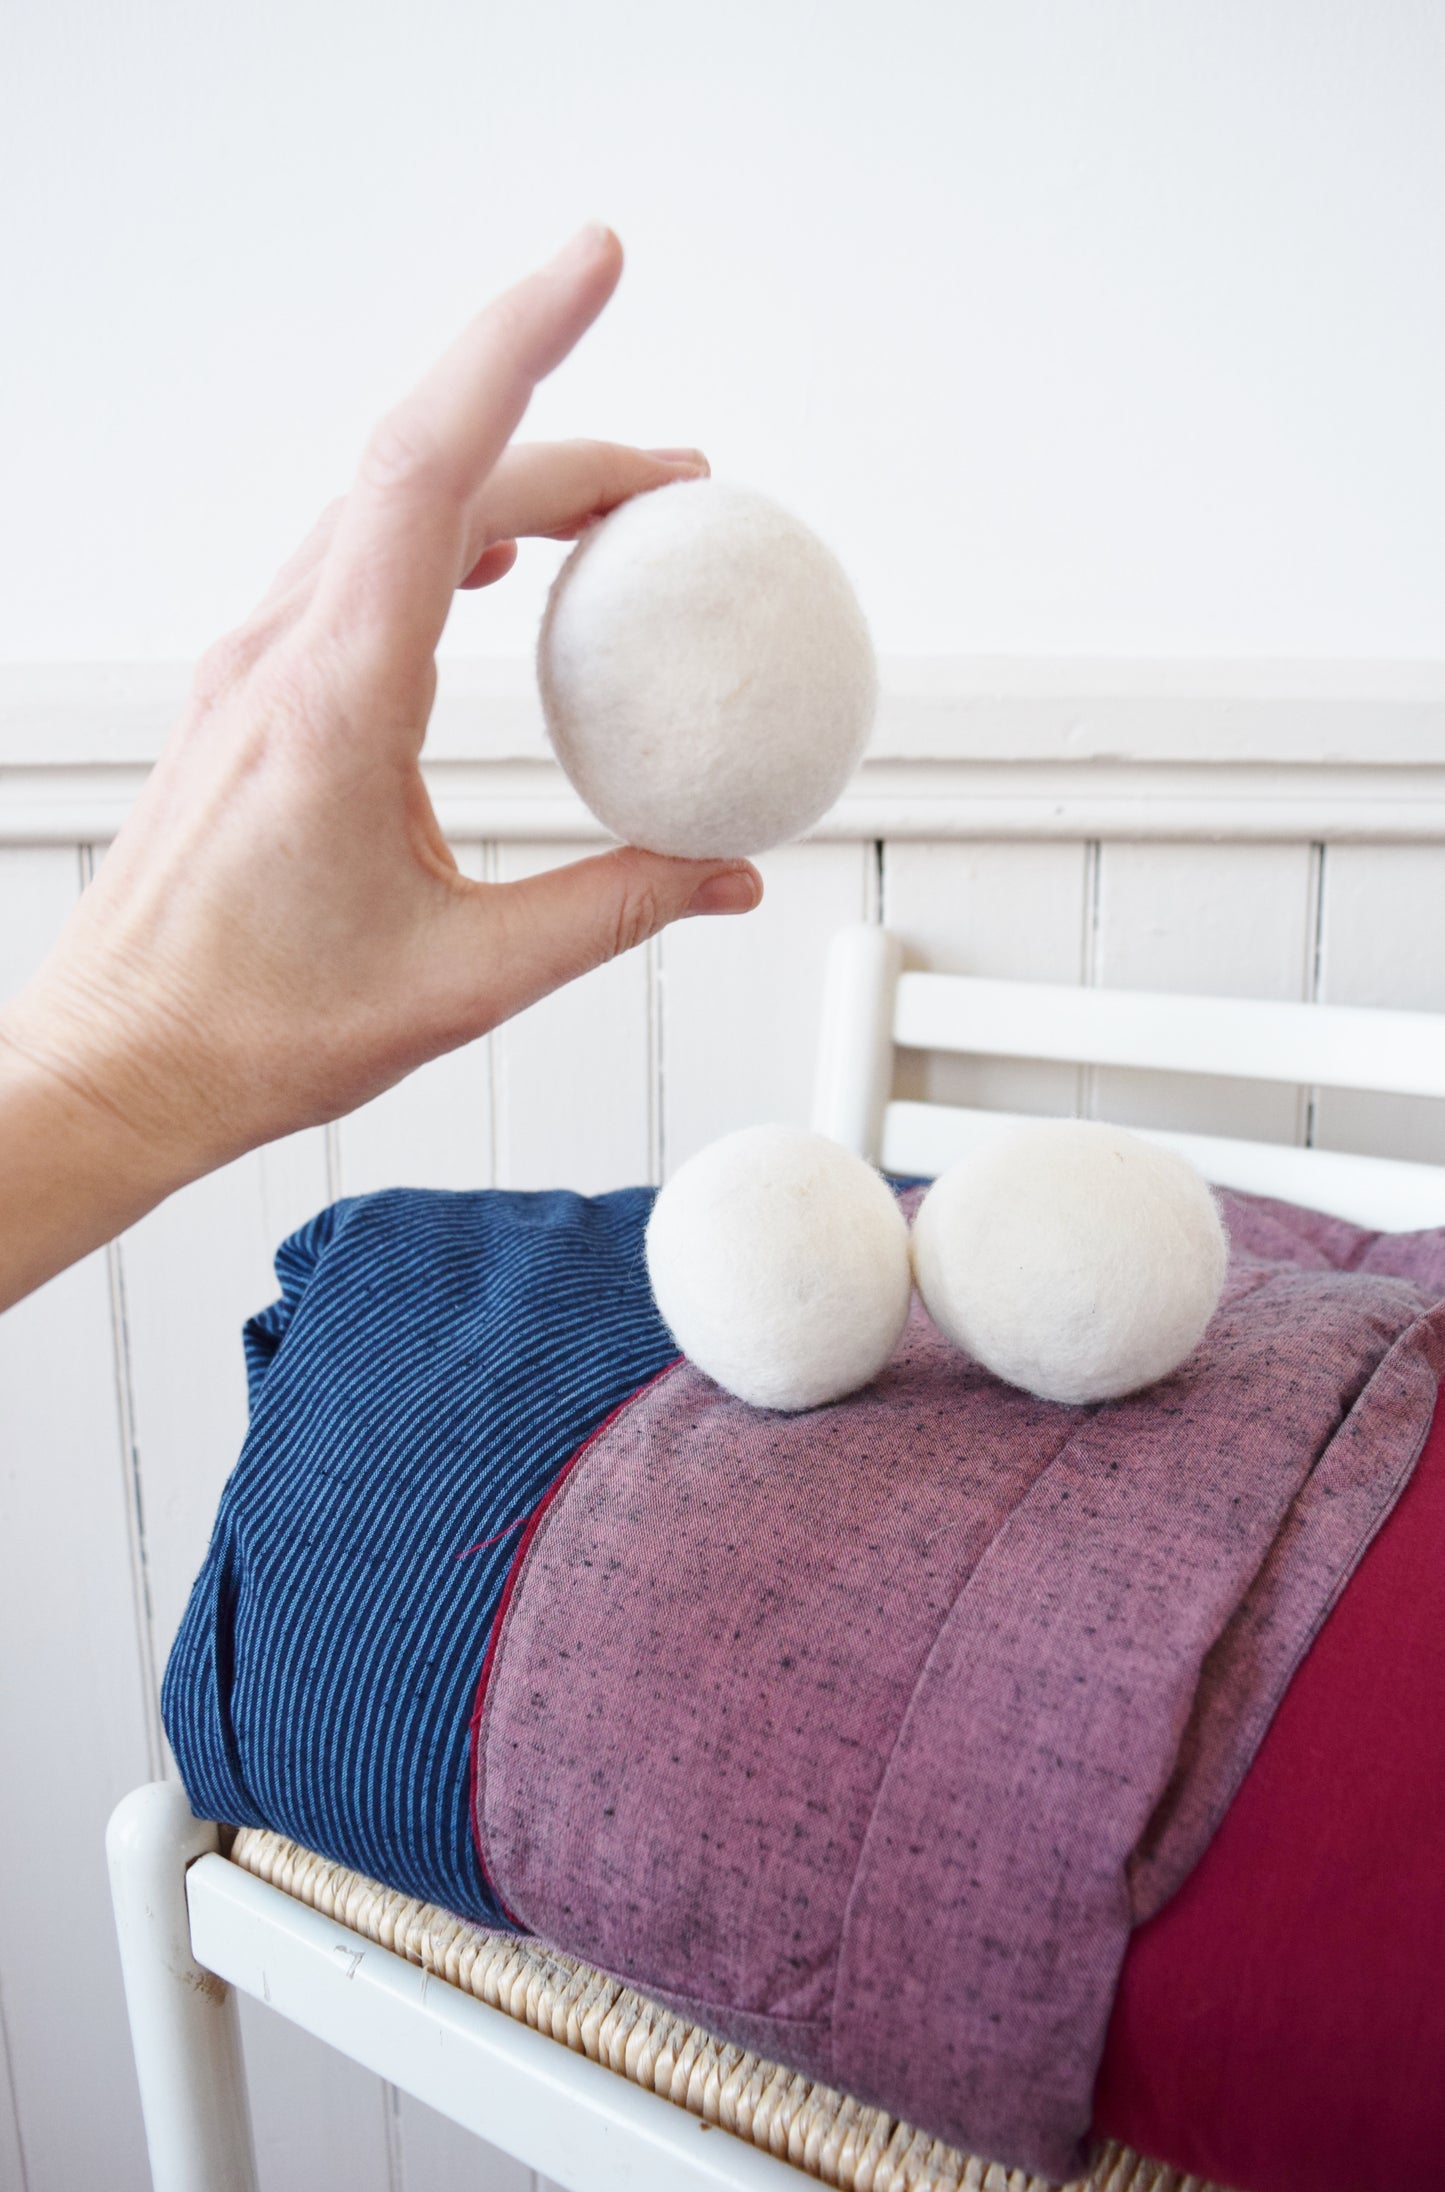 Wool Dryer Balls | 100% All Natural | Small Farm Sourced